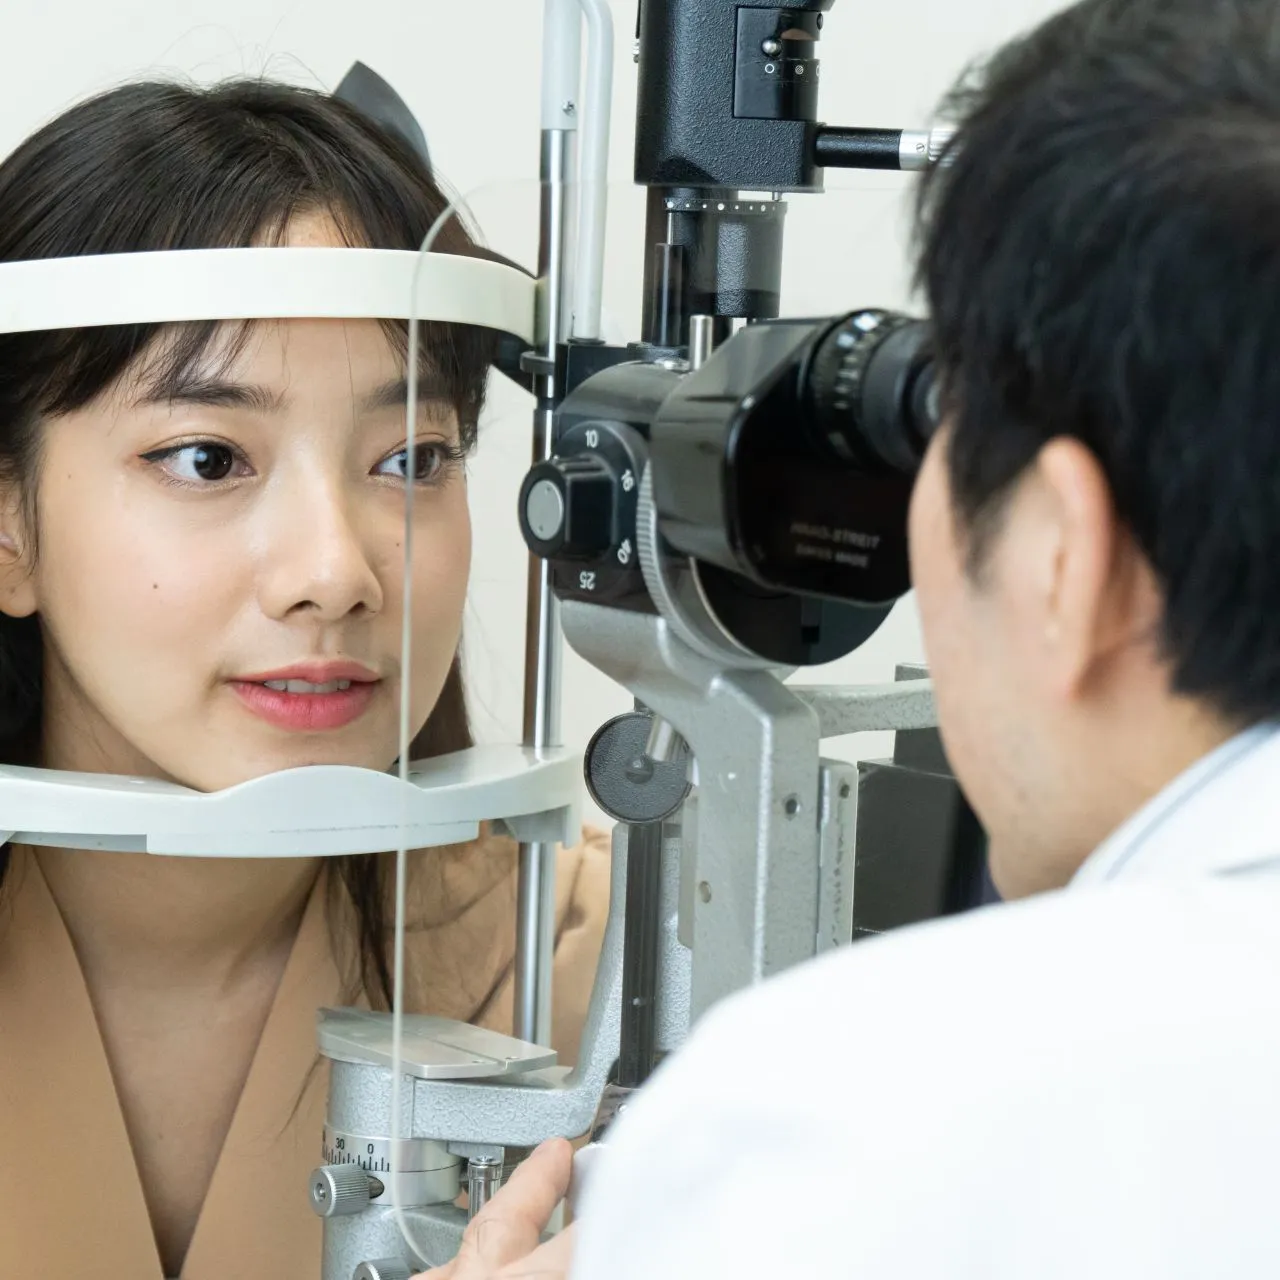 Slit lamp examination and discuss with our refractive surgeon